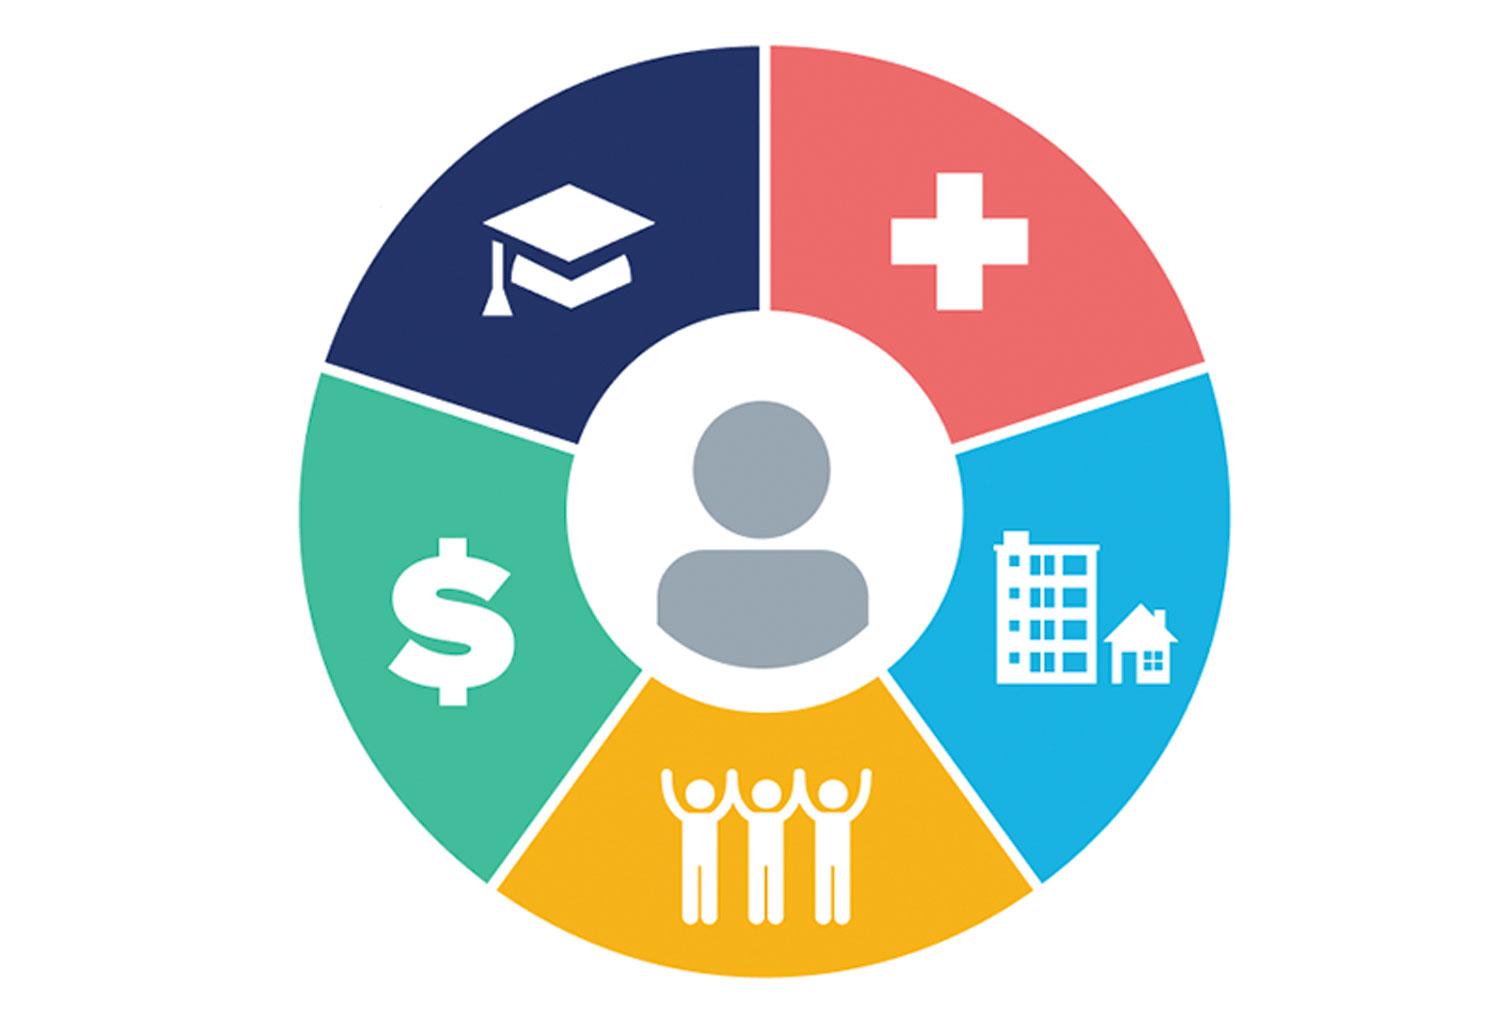 Illustration showing a person surrounded by the following icons: graduation cap, hospital cross, buildings, a dollar sign, and three people with their arms raised.